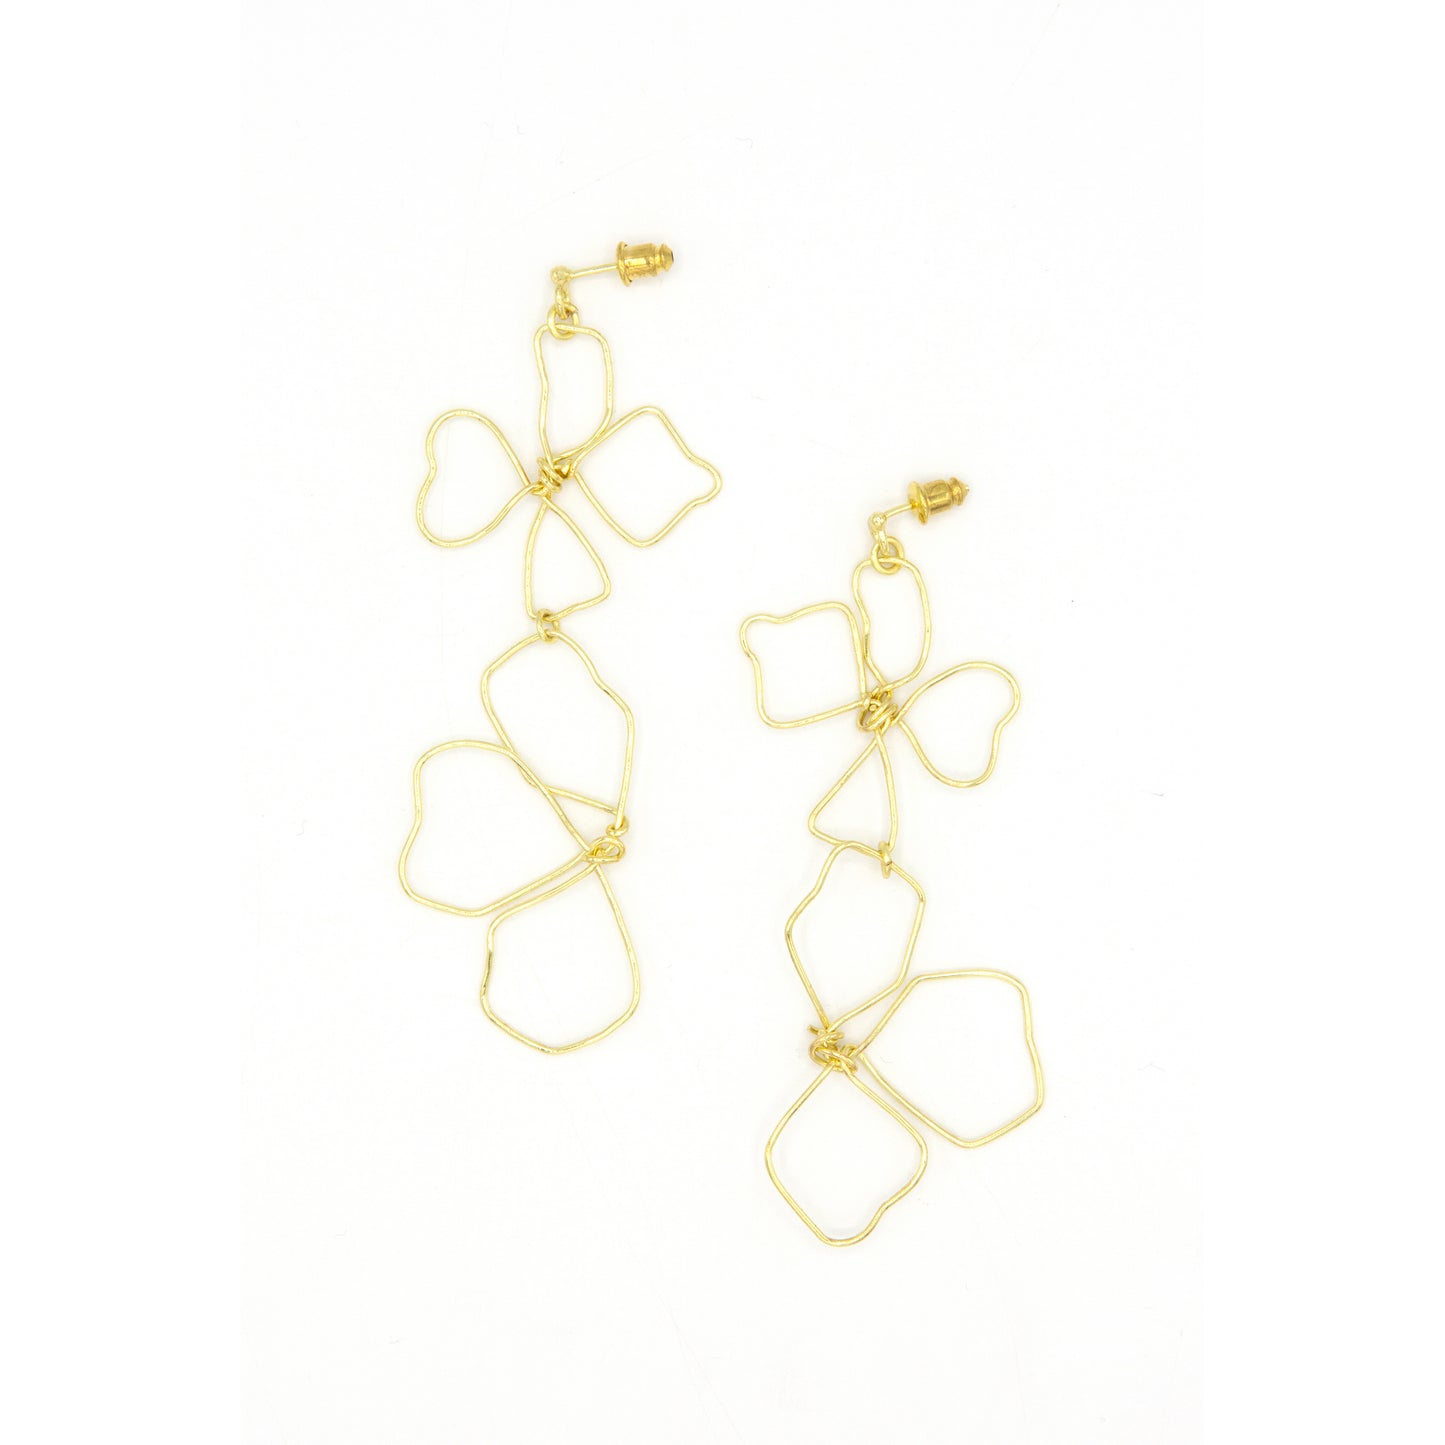 Continuous Line Art Earrings (Wildflowers)